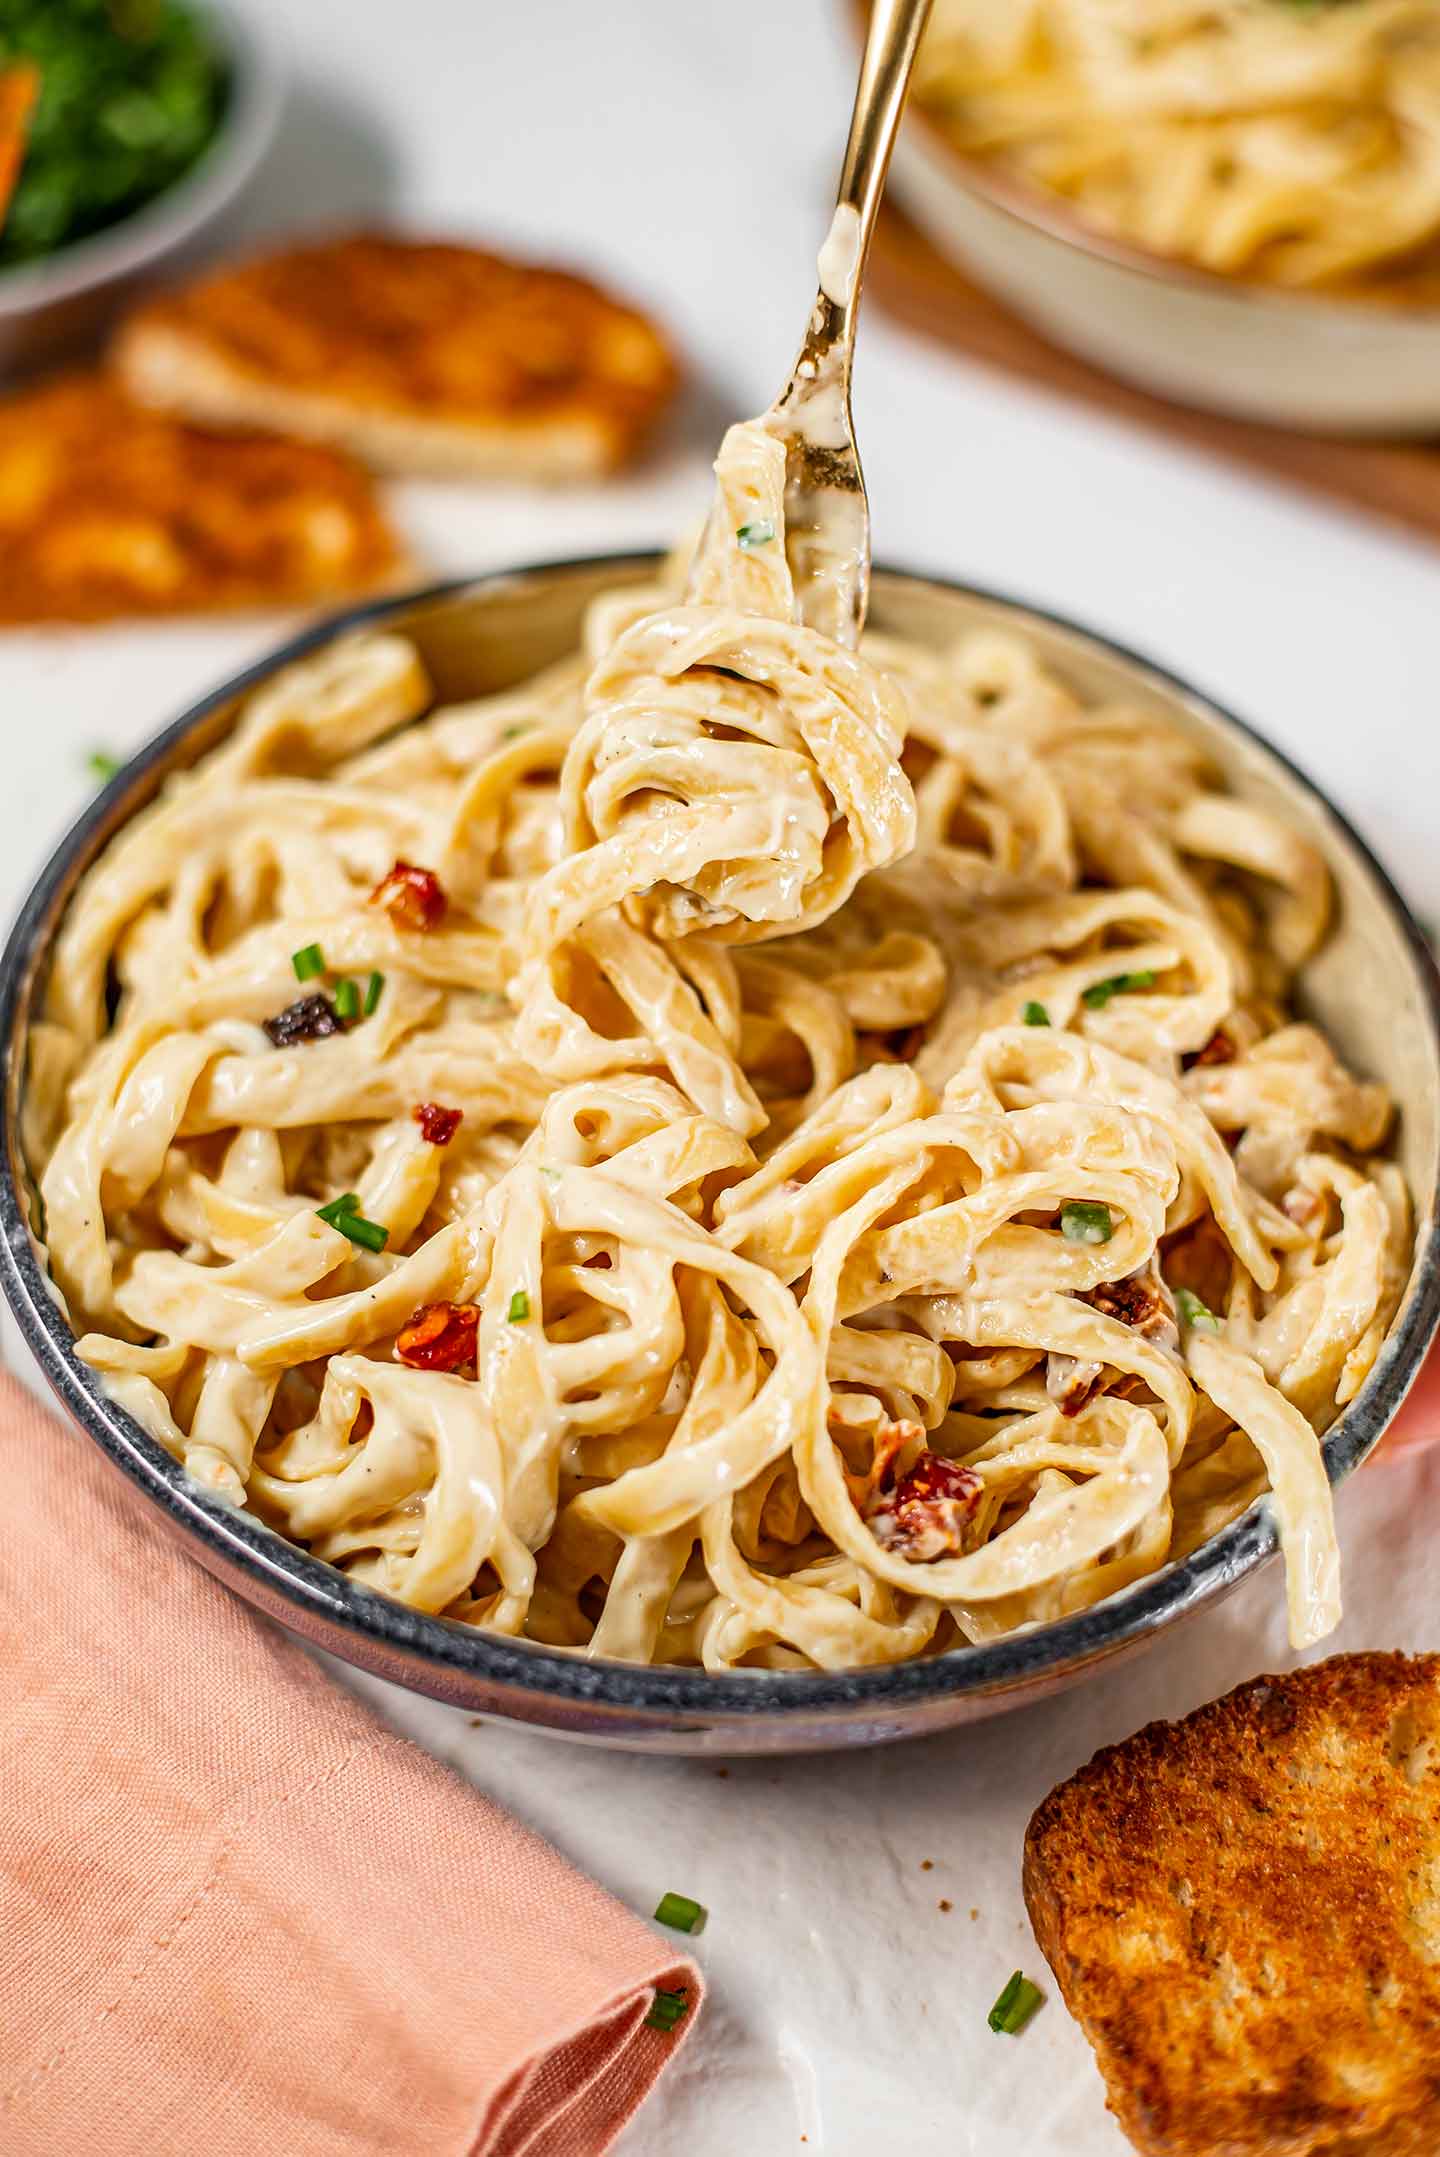 Fettuccine noodles coated in a creamy vegan alfredo sauce wrap around a fork lifting up from a bowl of pasta.